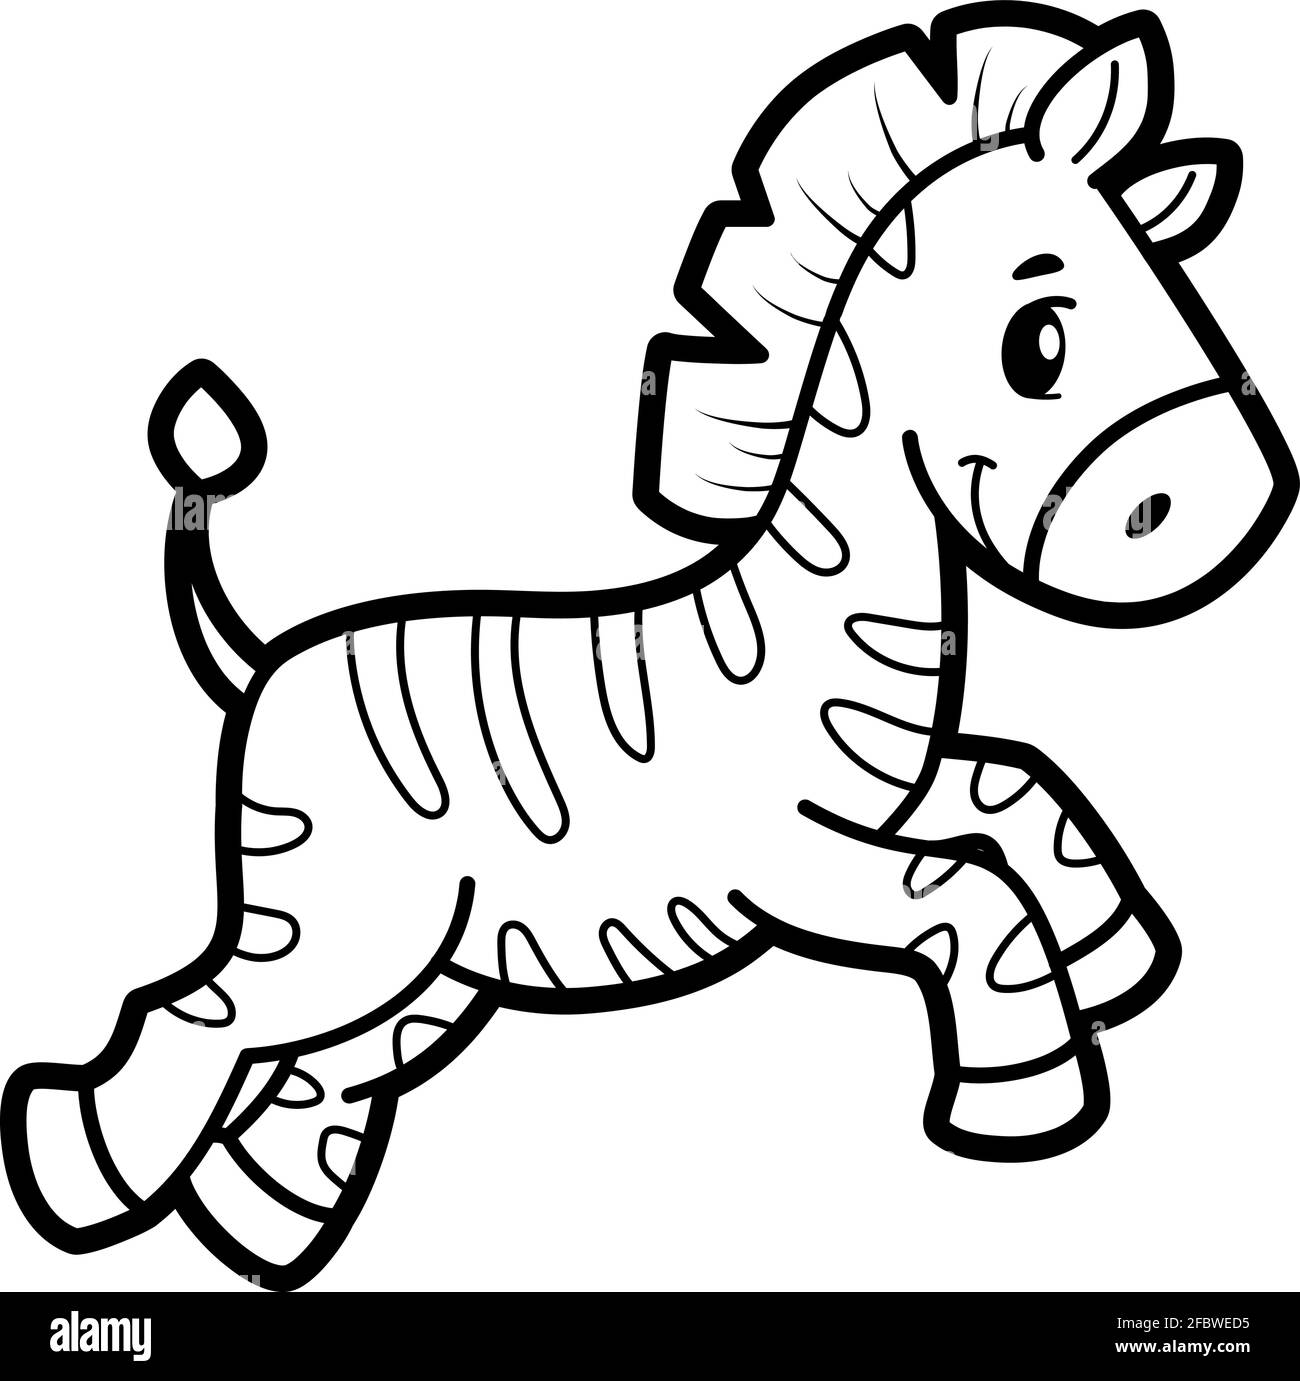 Coloring book or page for kids. Zebra black and white vector ...